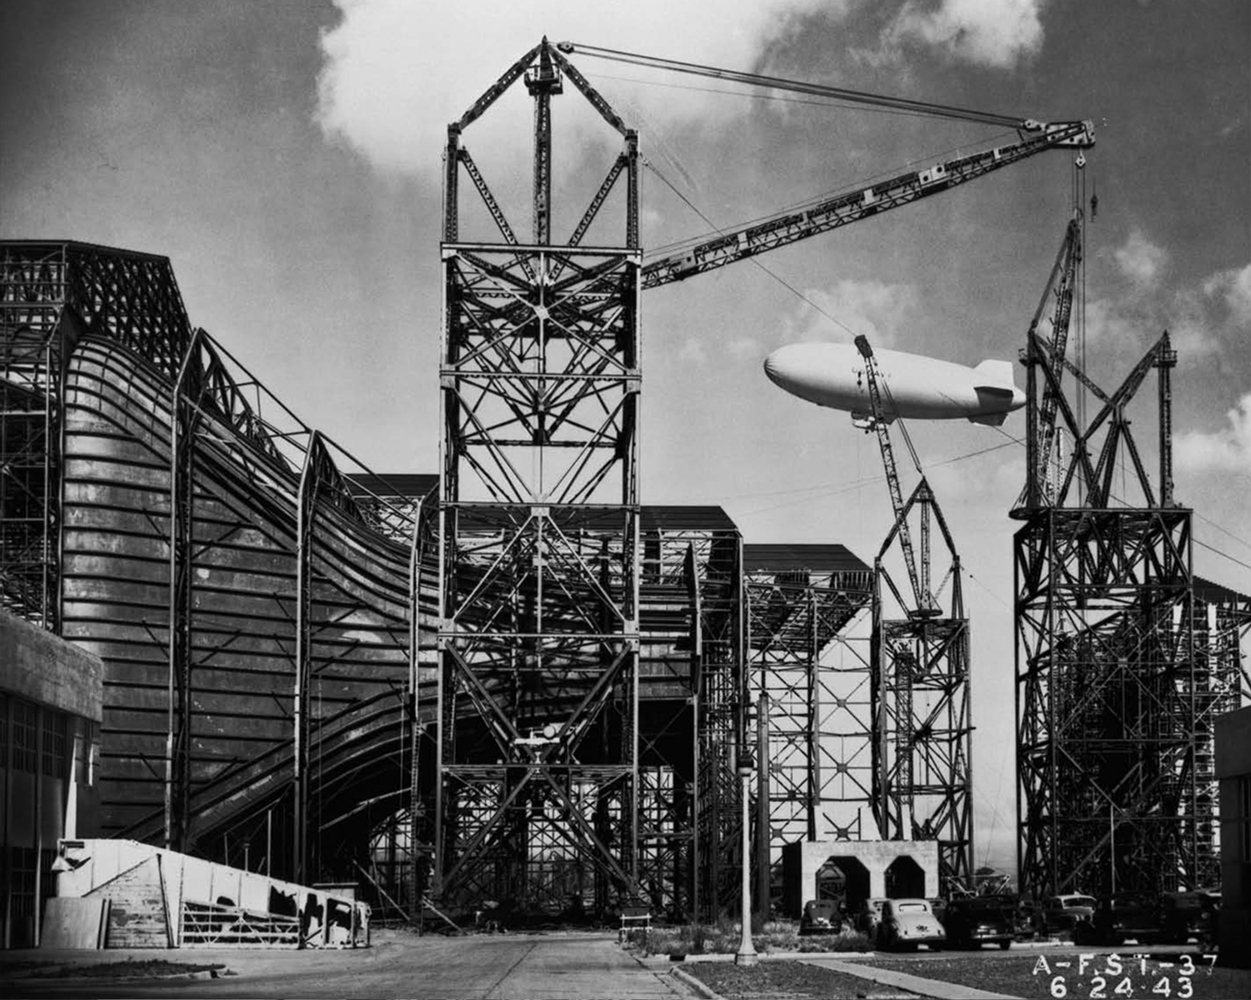 Three steel construction cranes stand beside the curved metal exterior of an under construction wind tunnel. A nearby blimp ascends into the sky.